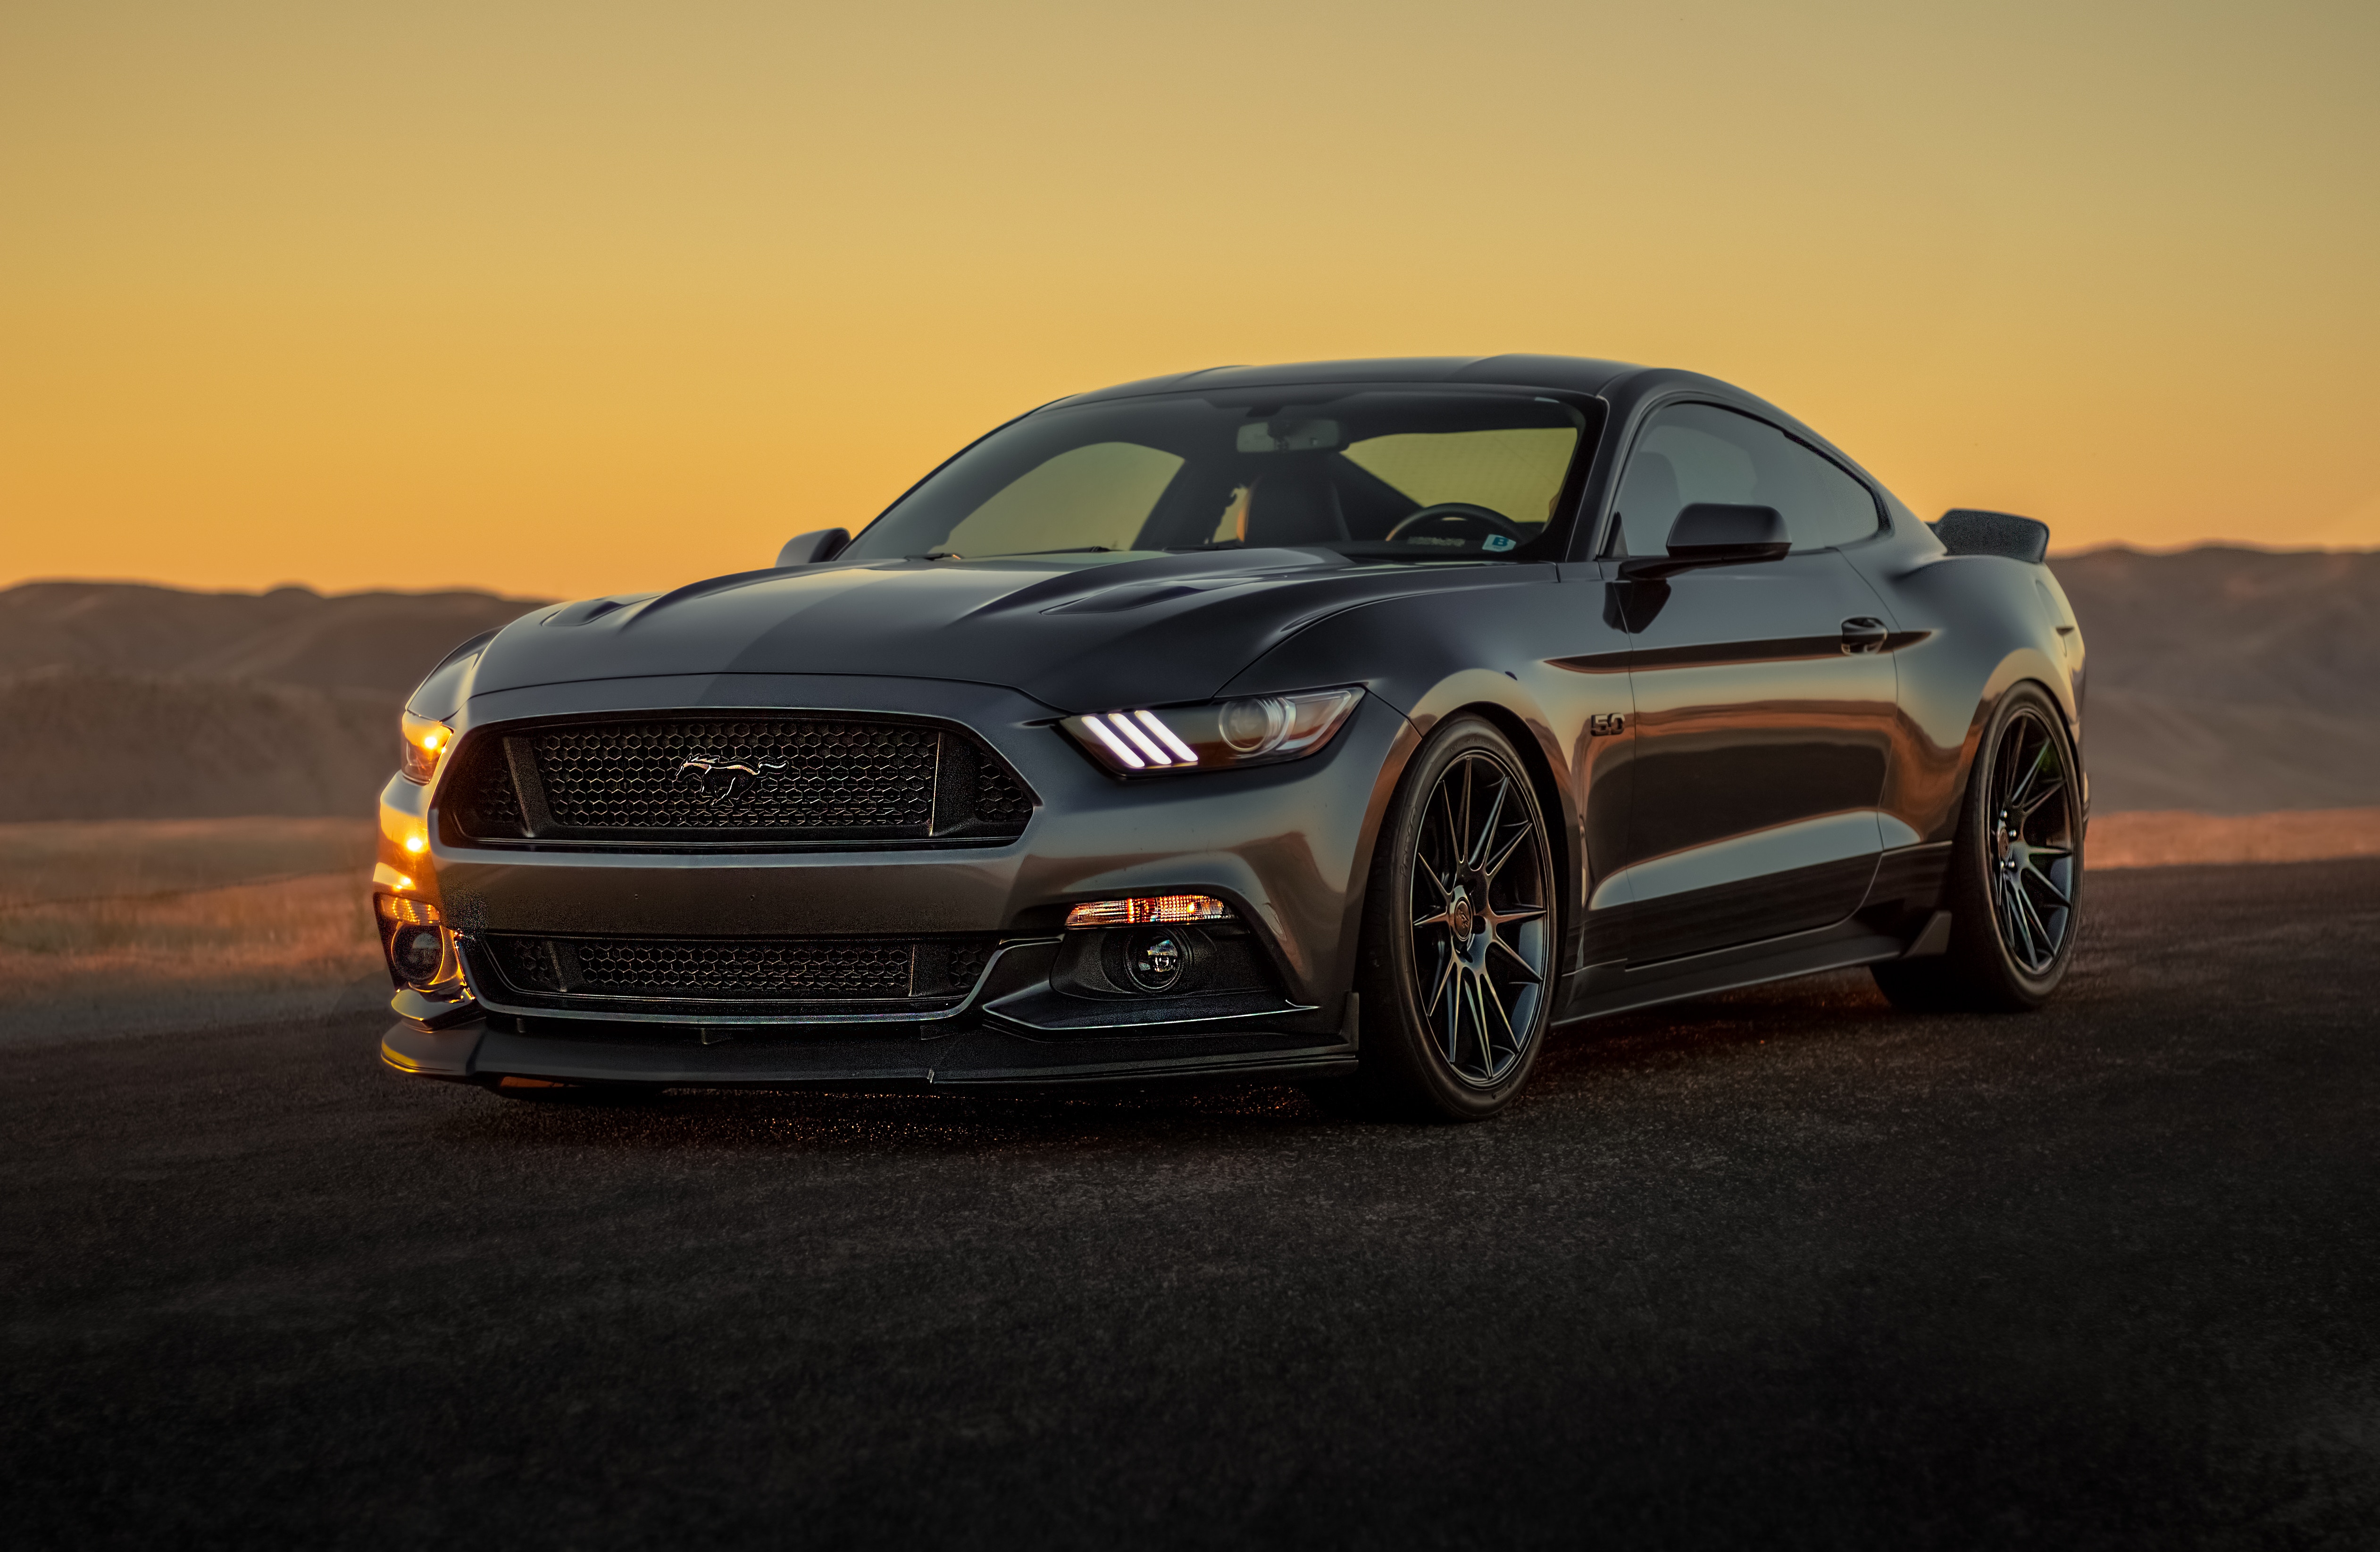 ford, ford mustang, cars, sunset, grey, bumper